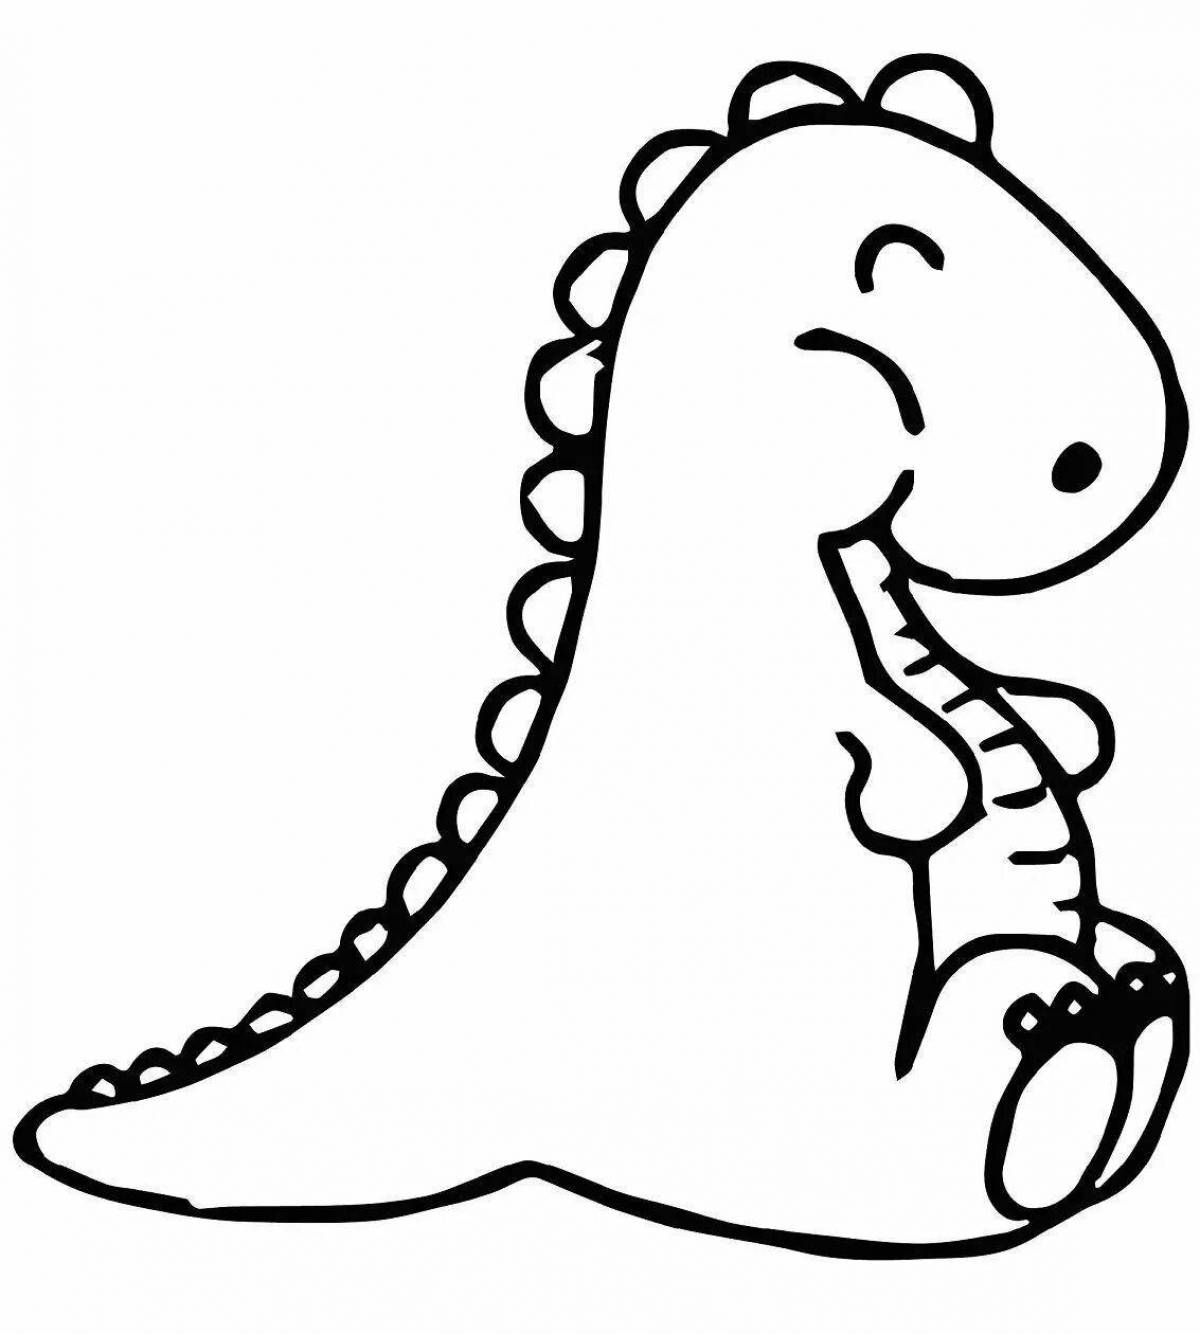 Playful dinosaur coloring page for kids